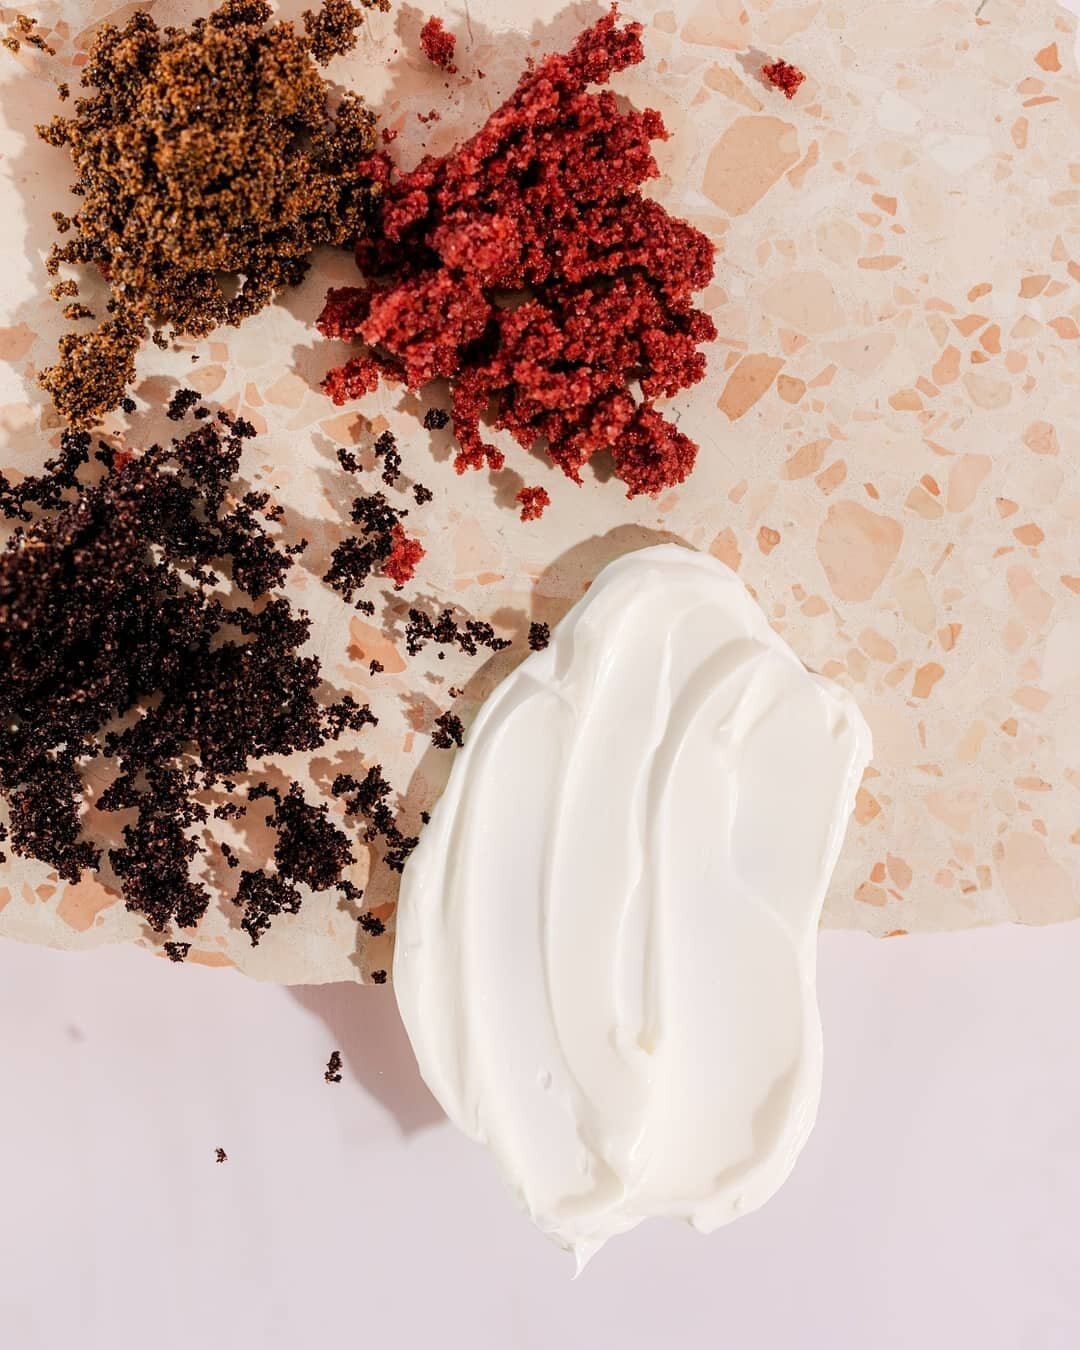 Look at those textures! Our body polishes are available in:
​✨&nbsp;Wild Orange &amp; Coconut
​✨&nbsp;Rose &amp; Himalayan Salt
​✨&nbsp;Coffee
​
​Which flavour would you pick for silky smooth skin?